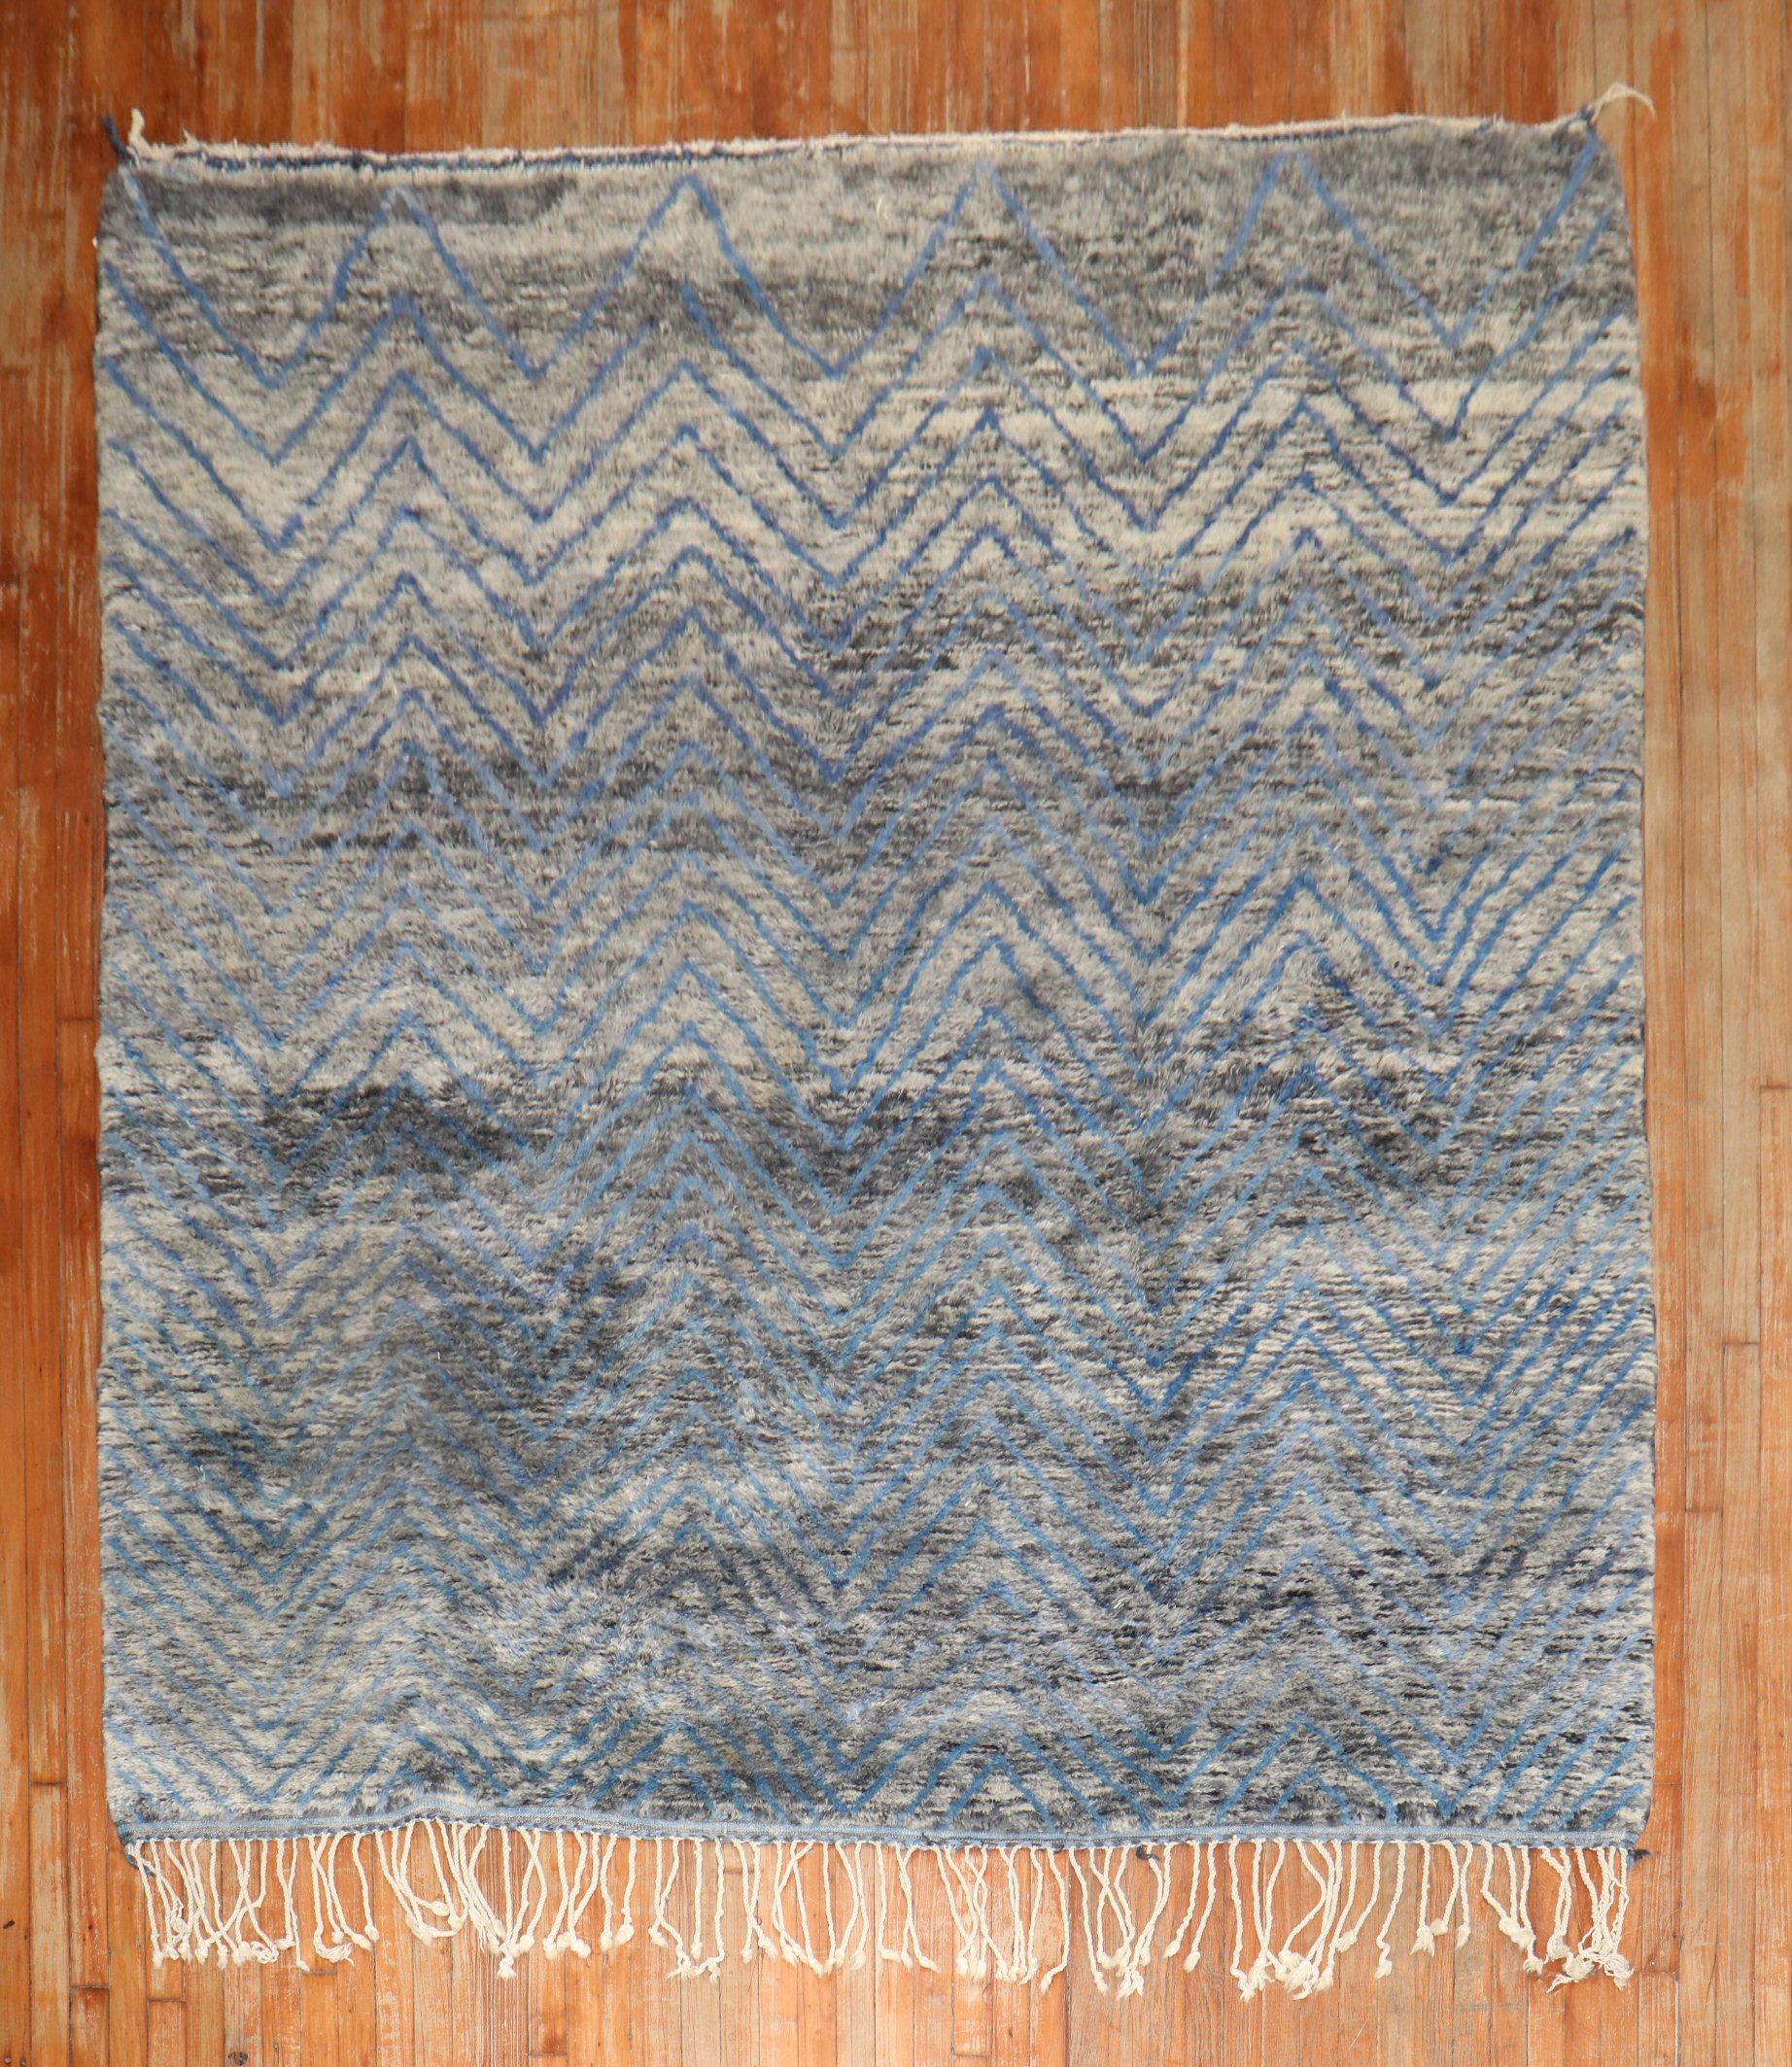 An early 21st Century Moroccan rug in gray and blue. The wool is lustrous and soft and cozy on the feet

Measures: 7'6'' x 9'6''.